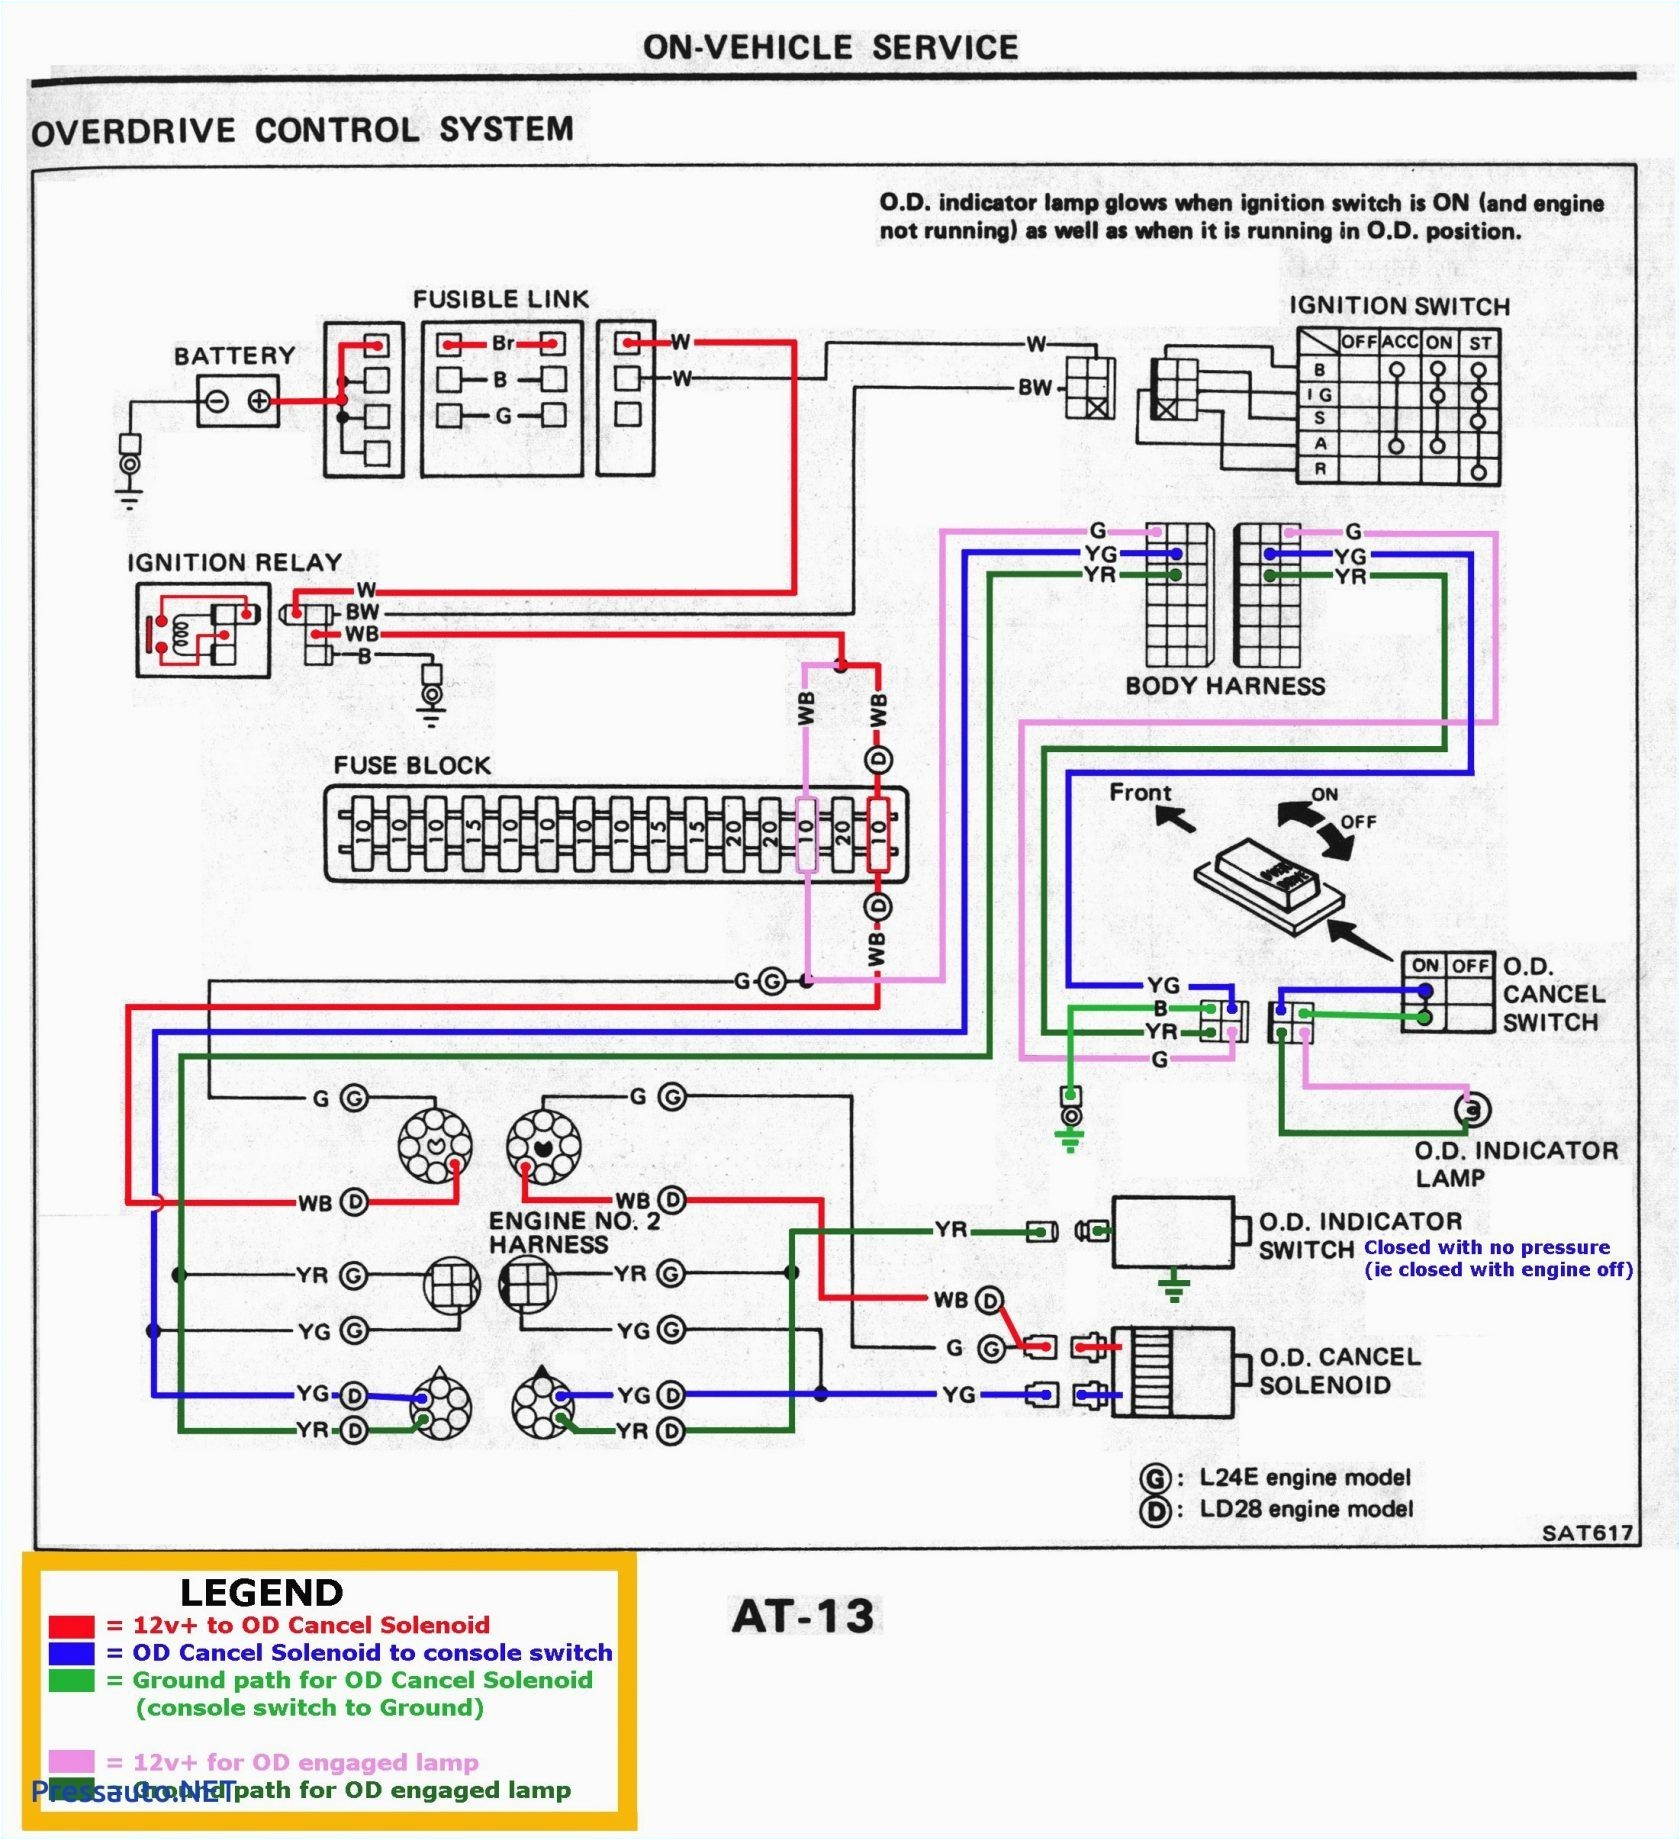 2 Pin Flasher Relay Wiring Diagram Lights Also Wig Wag Flasher Diagram Along with Galls Wig Wag Wiring